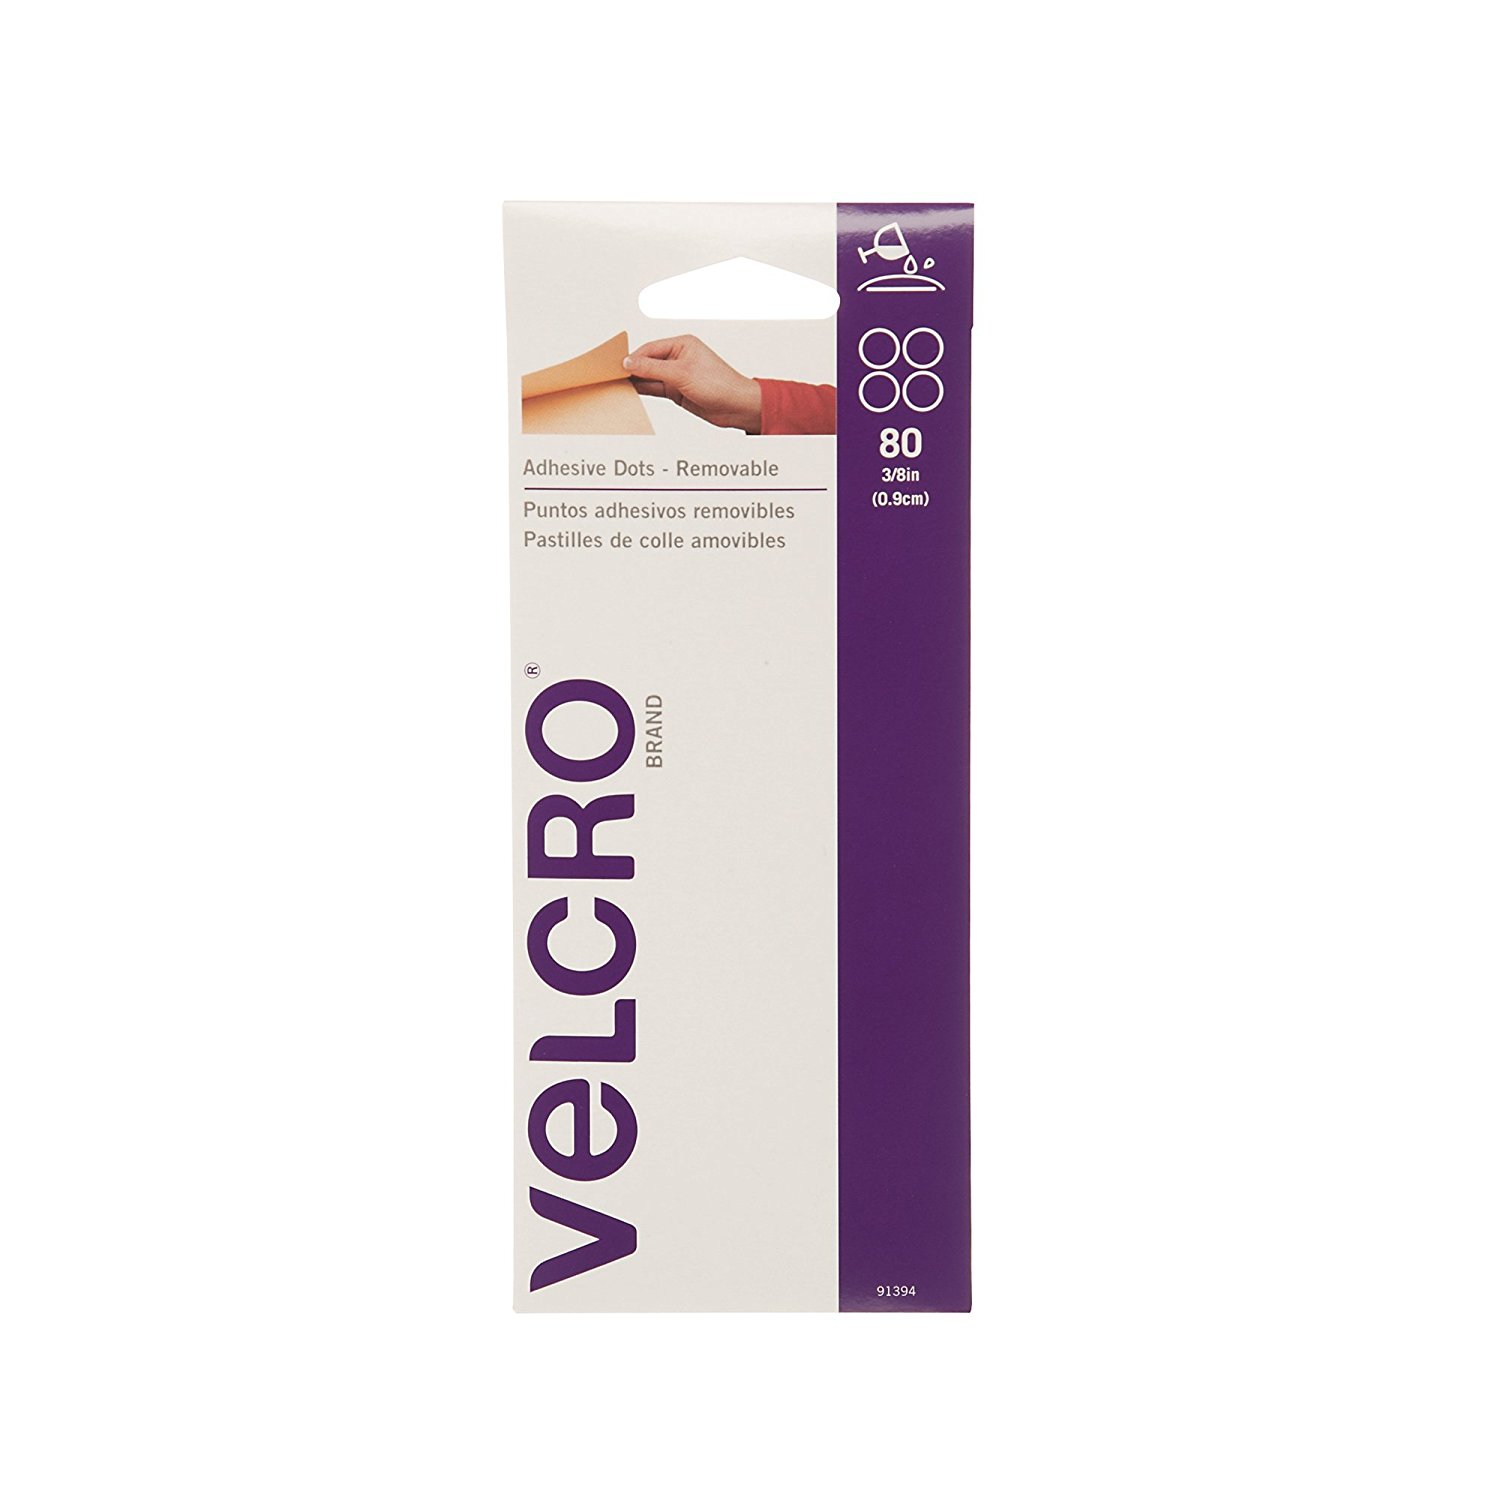 3/4 Dots - Clear Velcro Brand Tape - Combo Pack, 200/Case